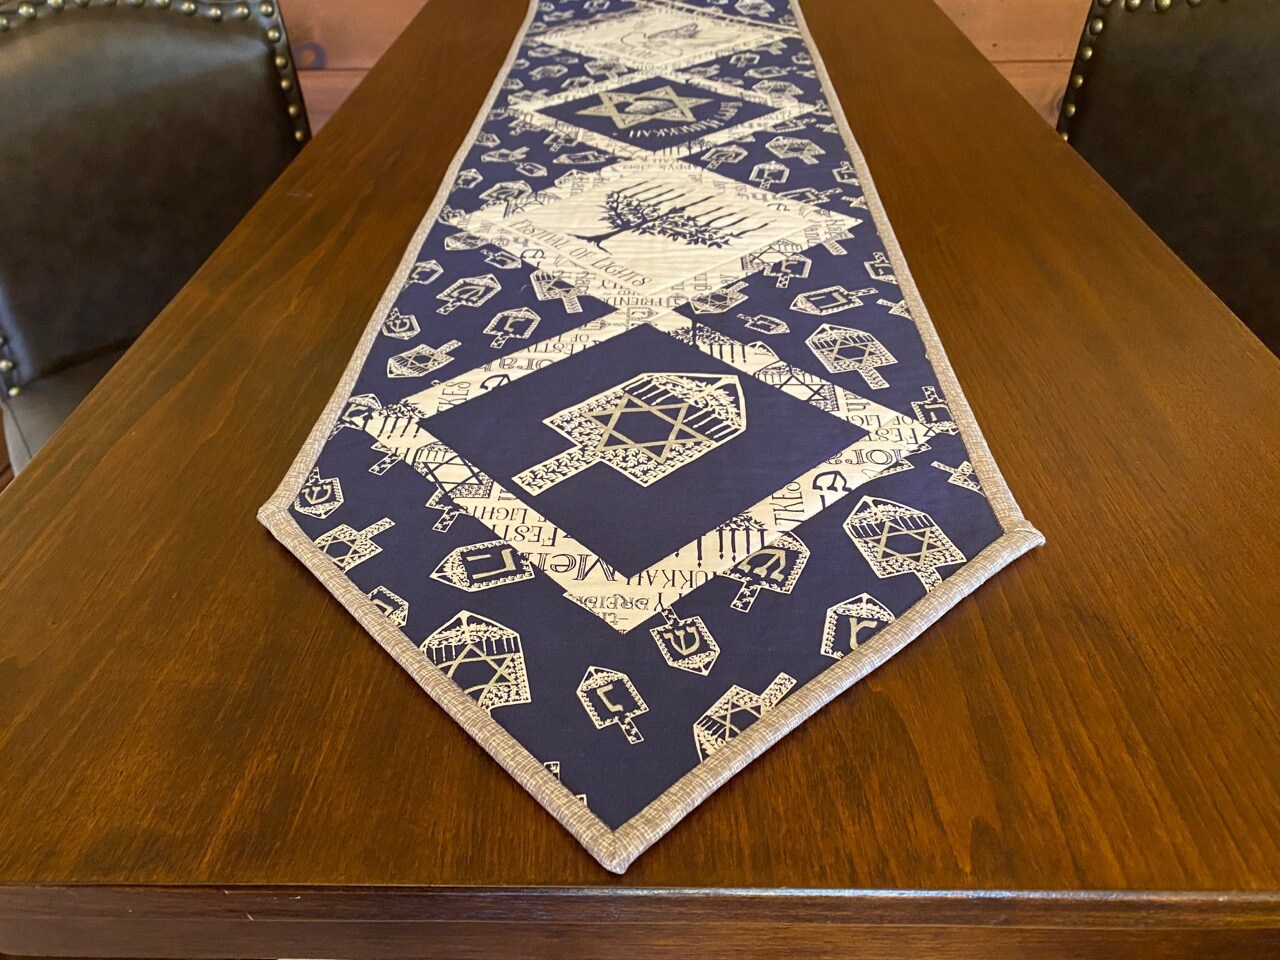 Festival of Lights Table Runner Sewing Tutorial at the Nancy Zieman Productions Blog IMG_4607